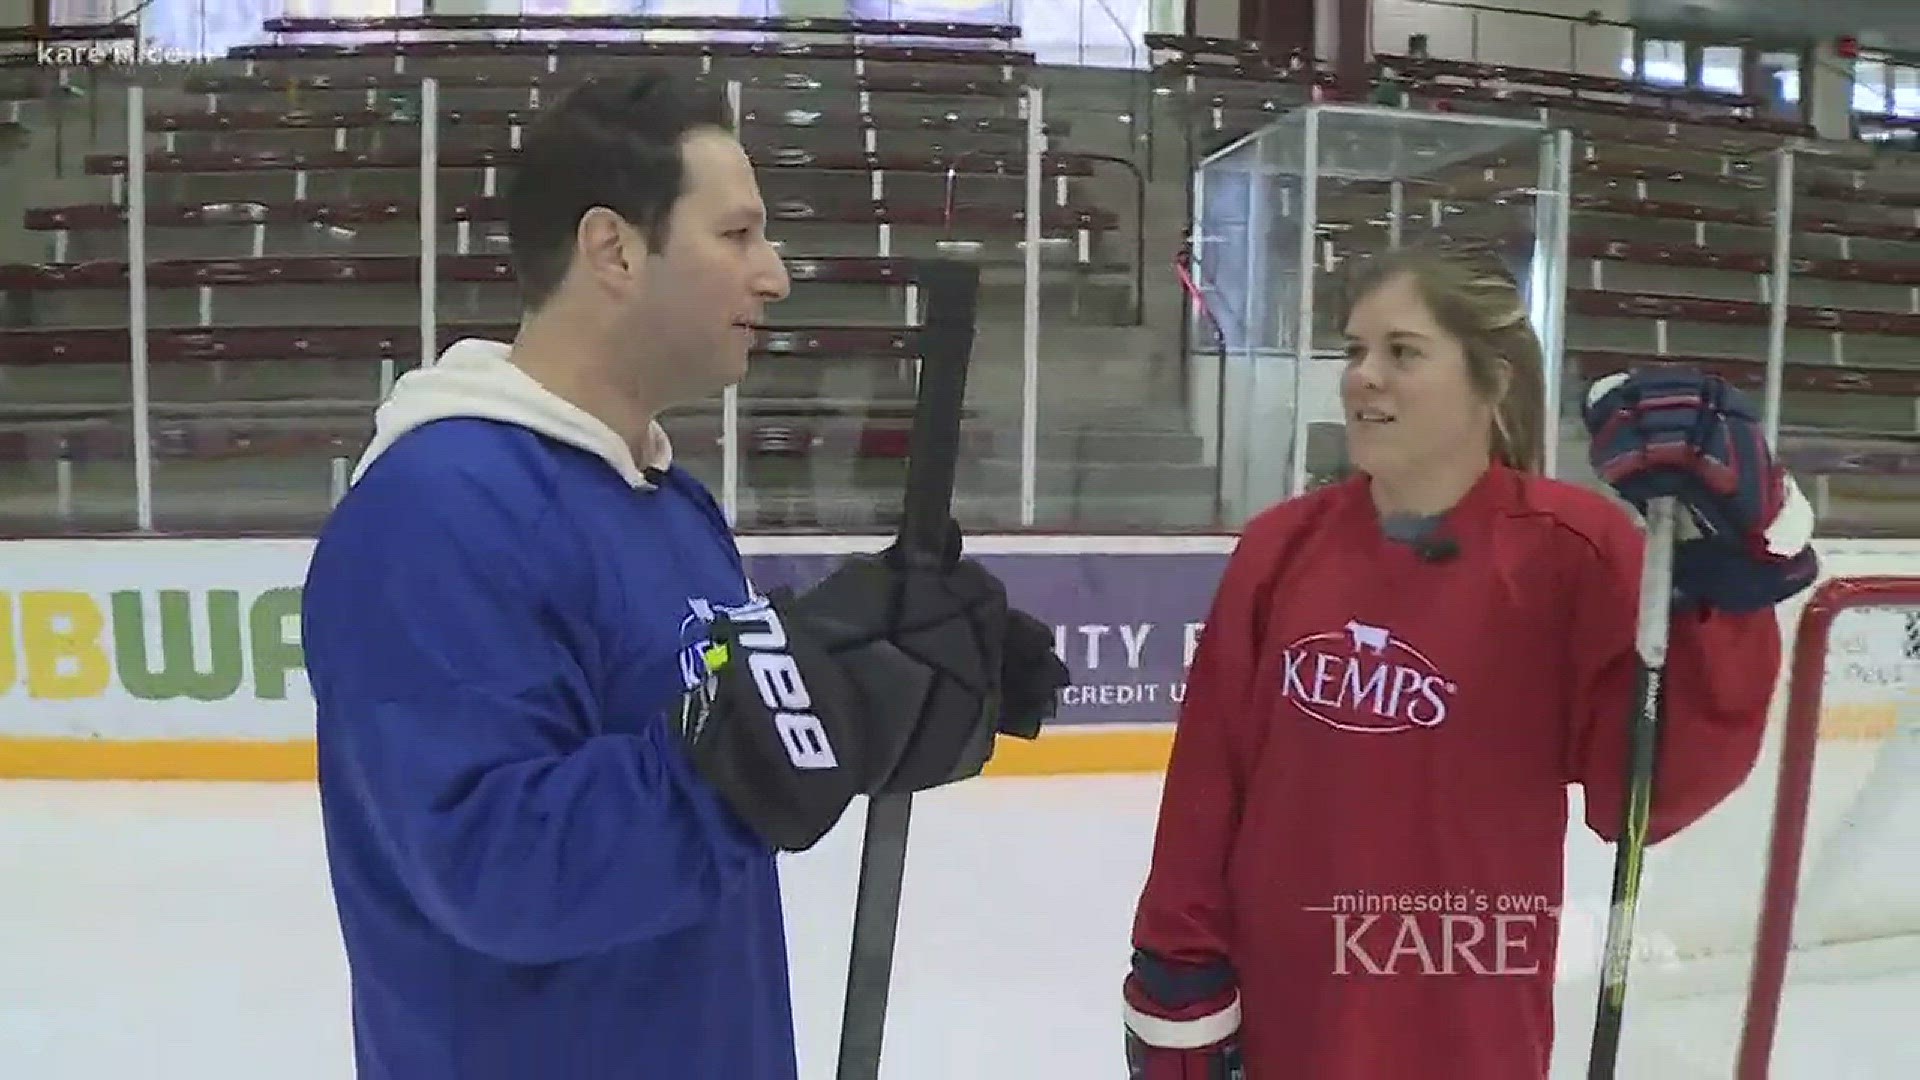 Dave tries to show off his hockey skills while playing against former University of Minnesota player Hannah Brandt as she prepares for her first Olympics.